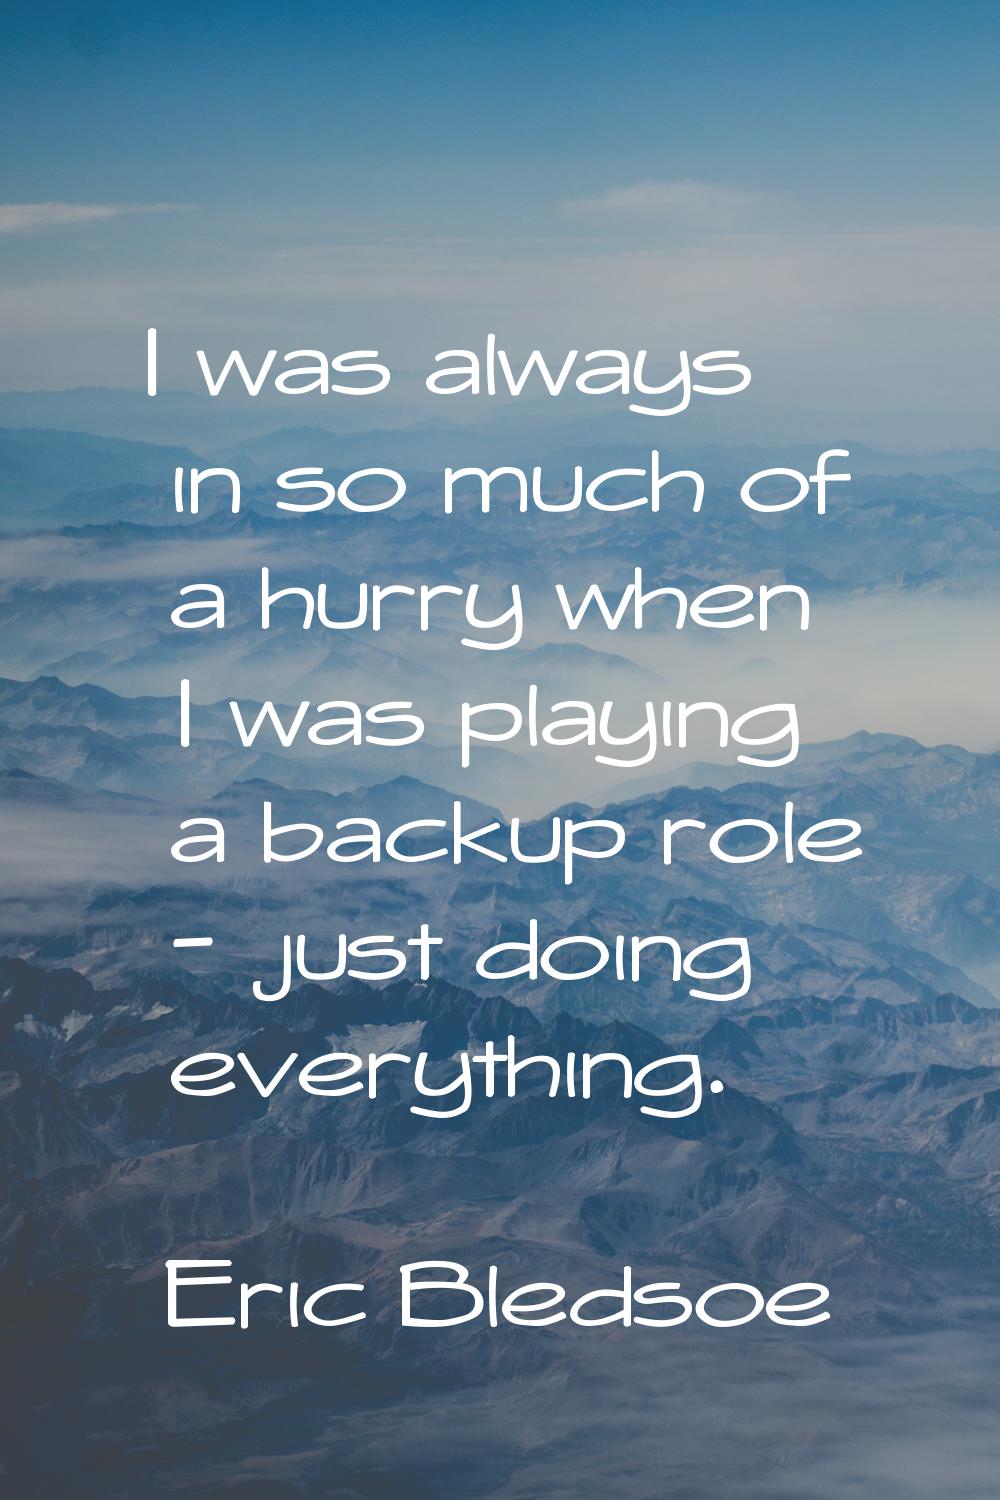 I was always in so much of a hurry when I was playing a backup role - just doing everything.